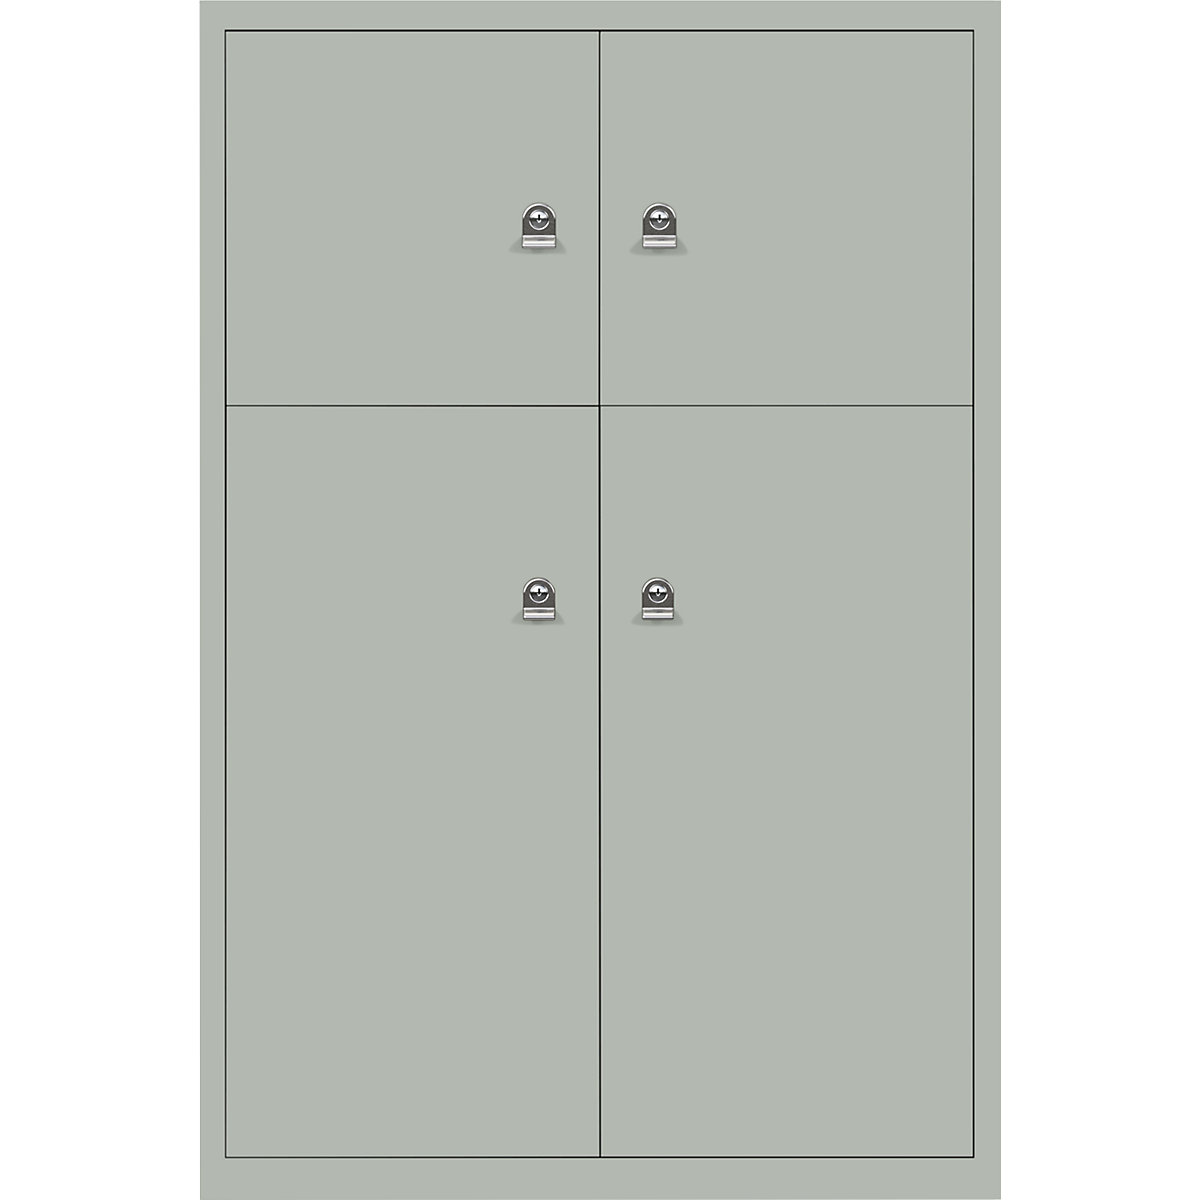 Armoire à casiers LateralFile™ – BISLEY, 4 casiers, hauteur 2 x 375 mm, 2 x 755 mm, york-21